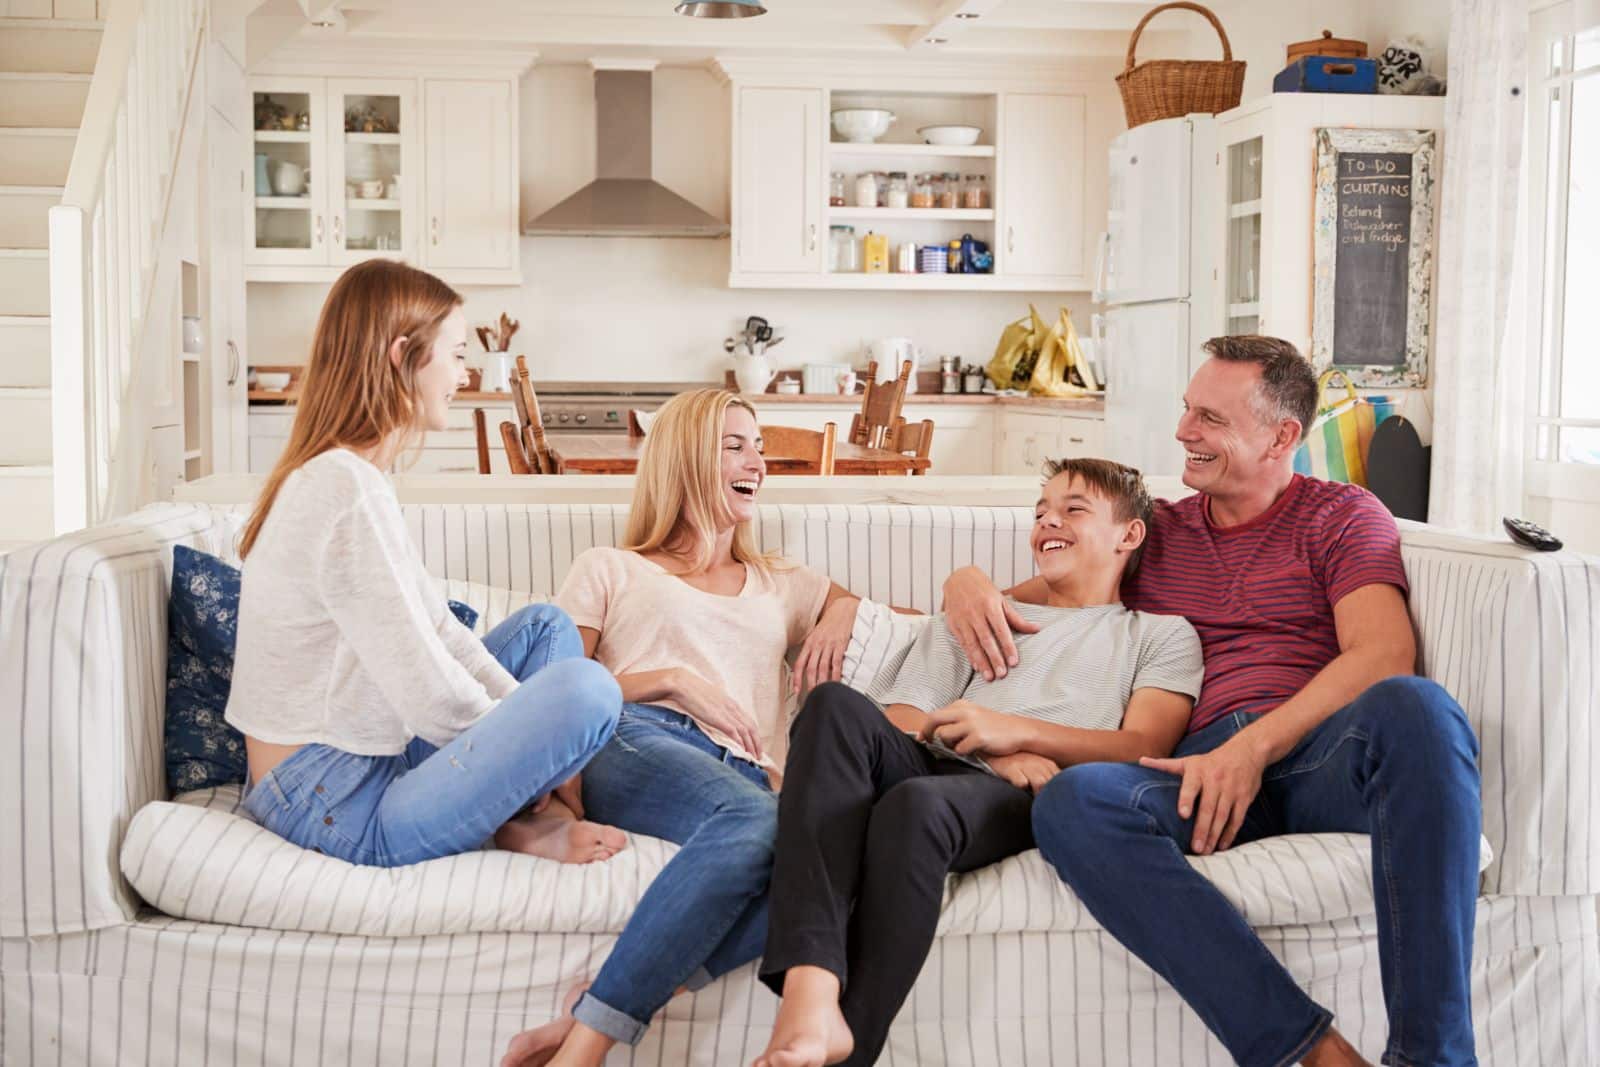 Image Credit: Shutterstock / Monkey Business Images <p><span>According to Treasury estimates, 92% of tax benefits from preferential rates on capital gains go to White families, leaving minimal benefits for Black and Hispanic families.</span></p>